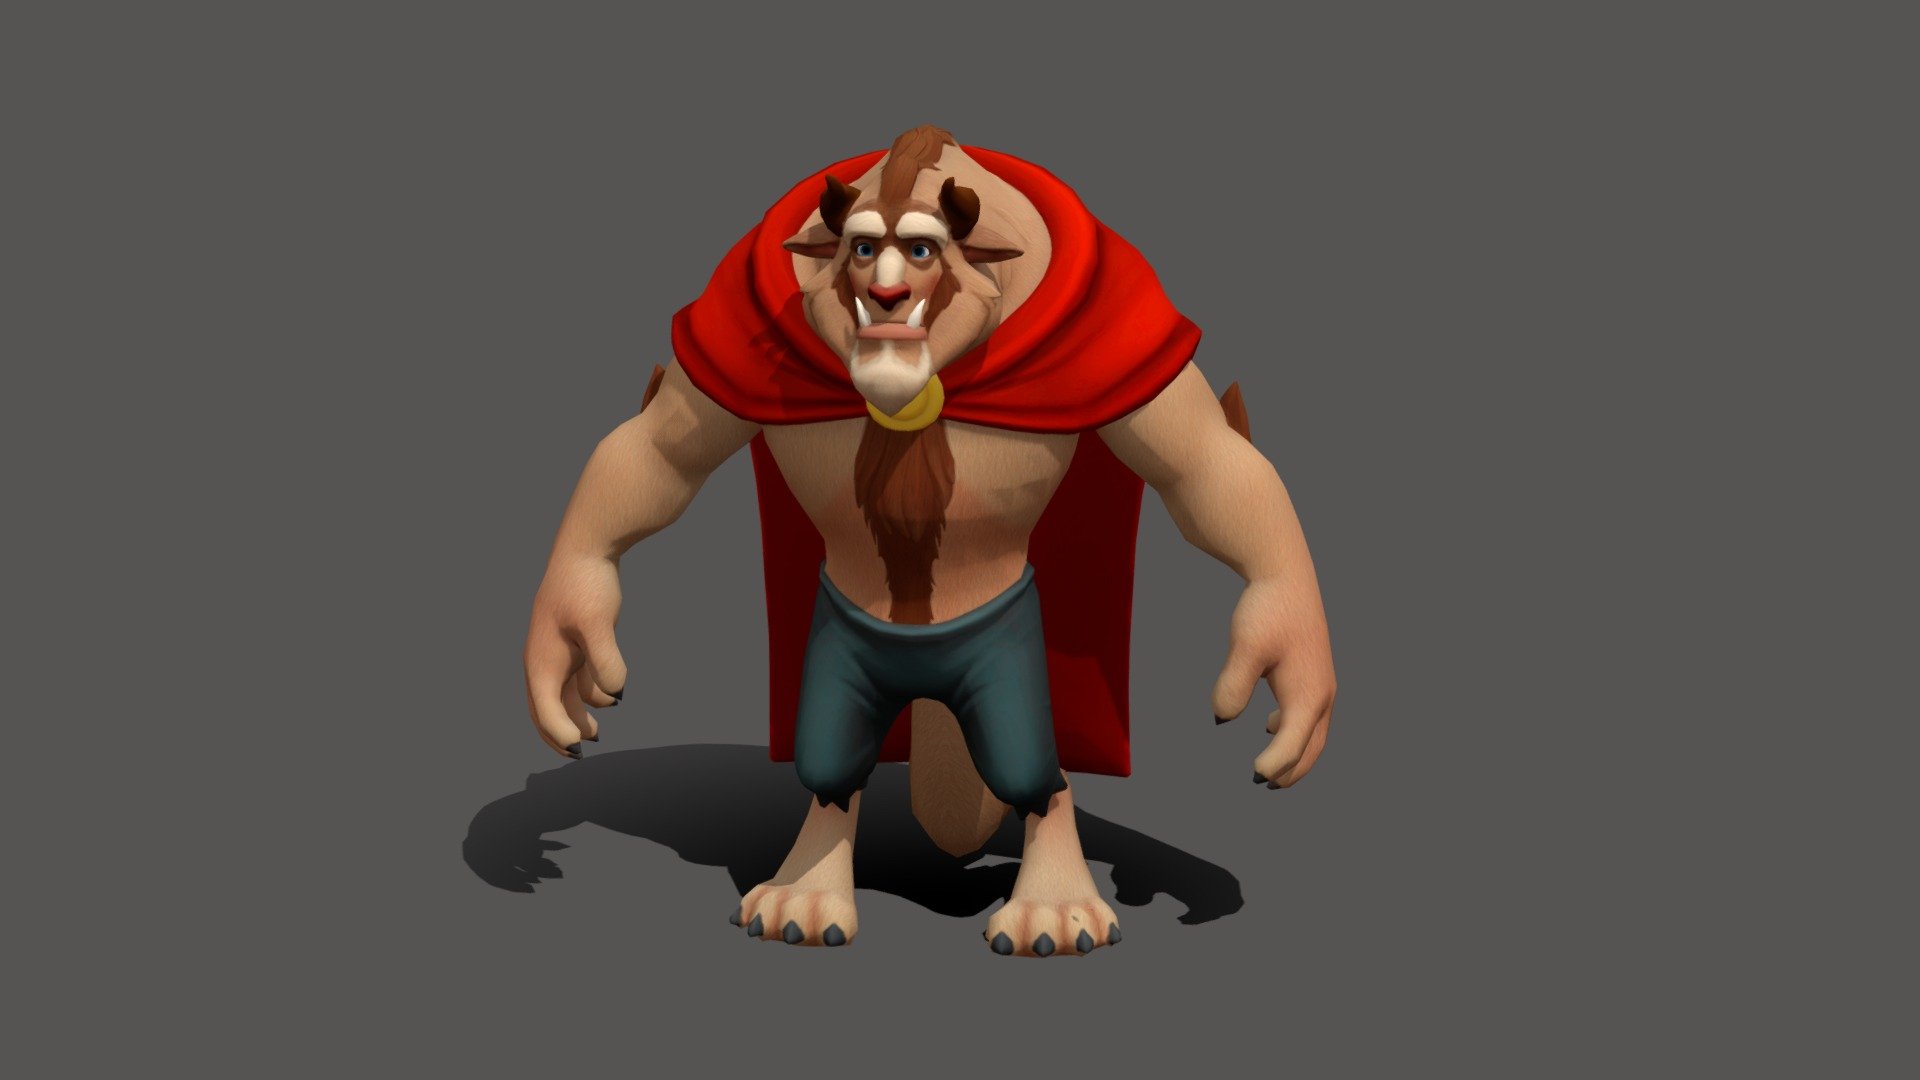 The Beast

Beauty and the Beast Cartoon

Fully Rigged - Mr Beast - Buy Royalty Free 3D model by Usman Ahmed GIll (@usman.ahmed.gill.93) 3d model